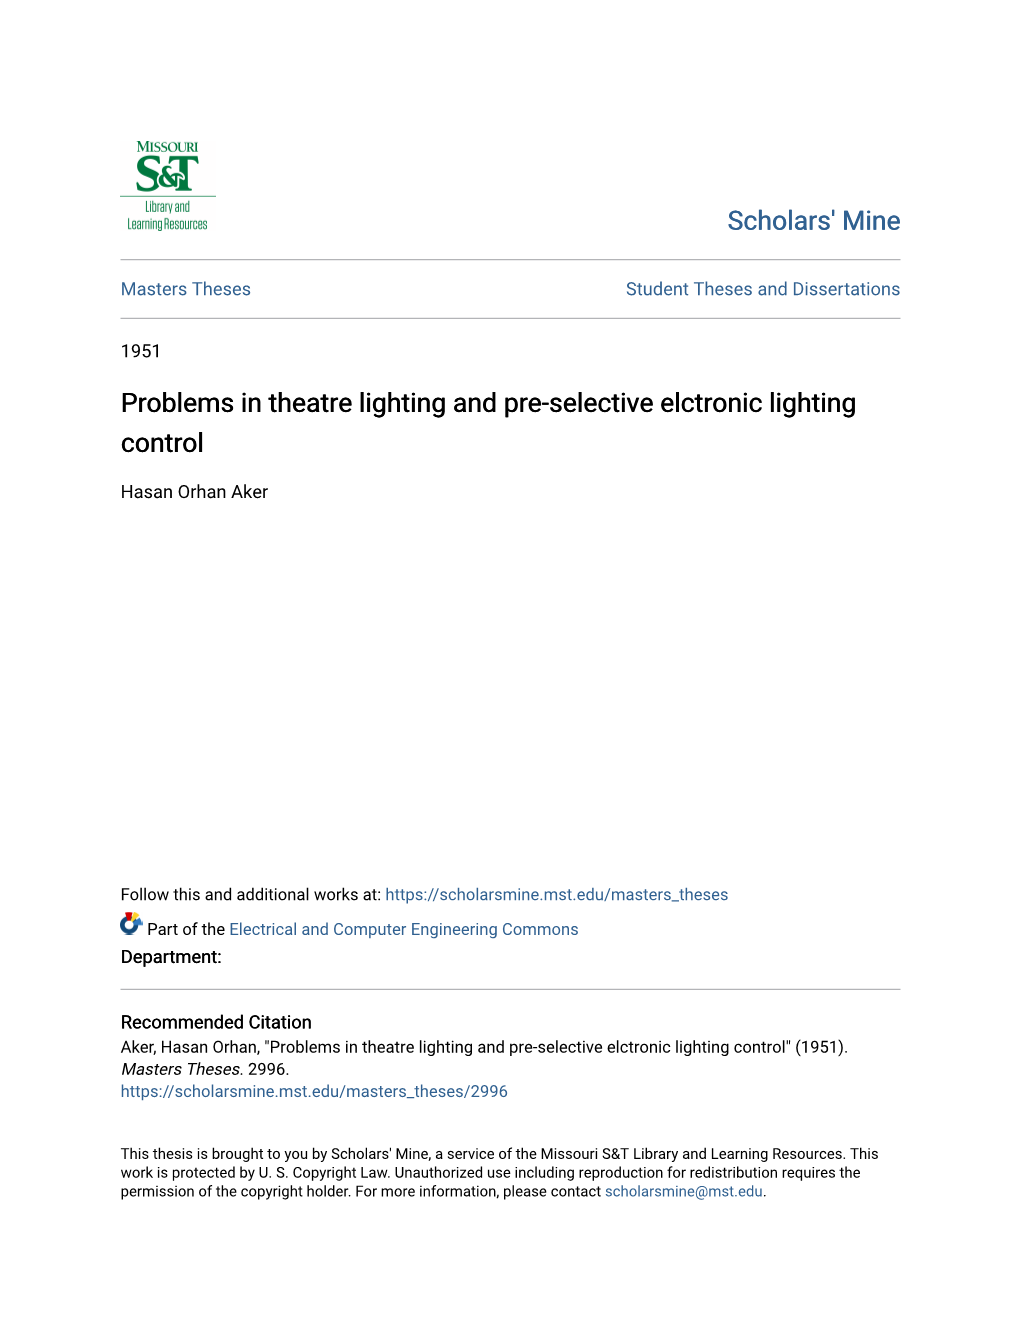 Problems in Theatre Lighting and Pre-Selective Elctronic Lighting Control